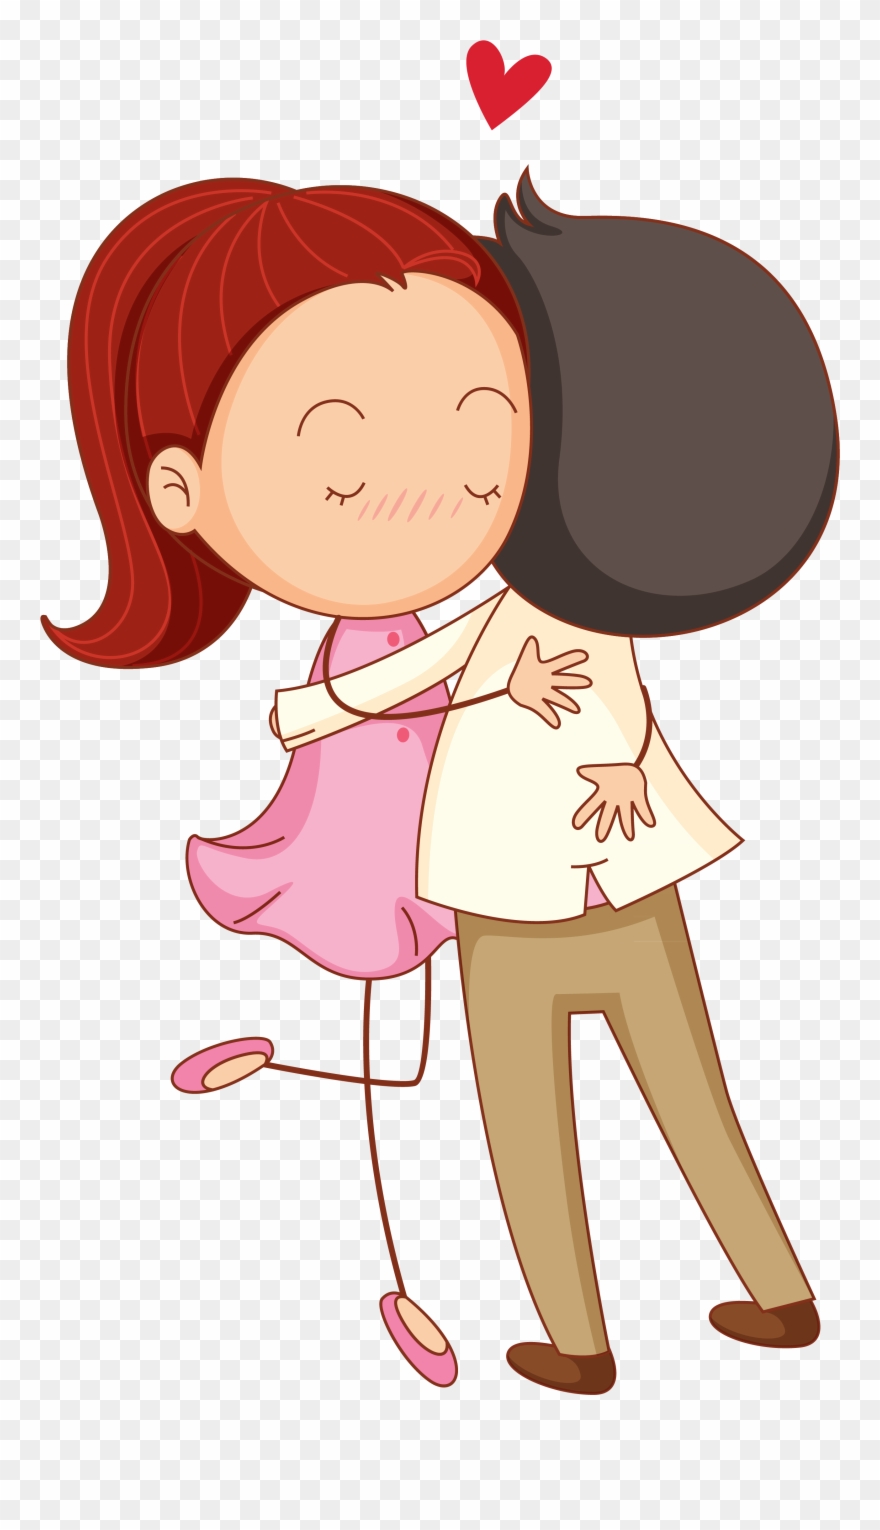 Hug Clipart Cartoon and other clipart images on Cliparts pub™